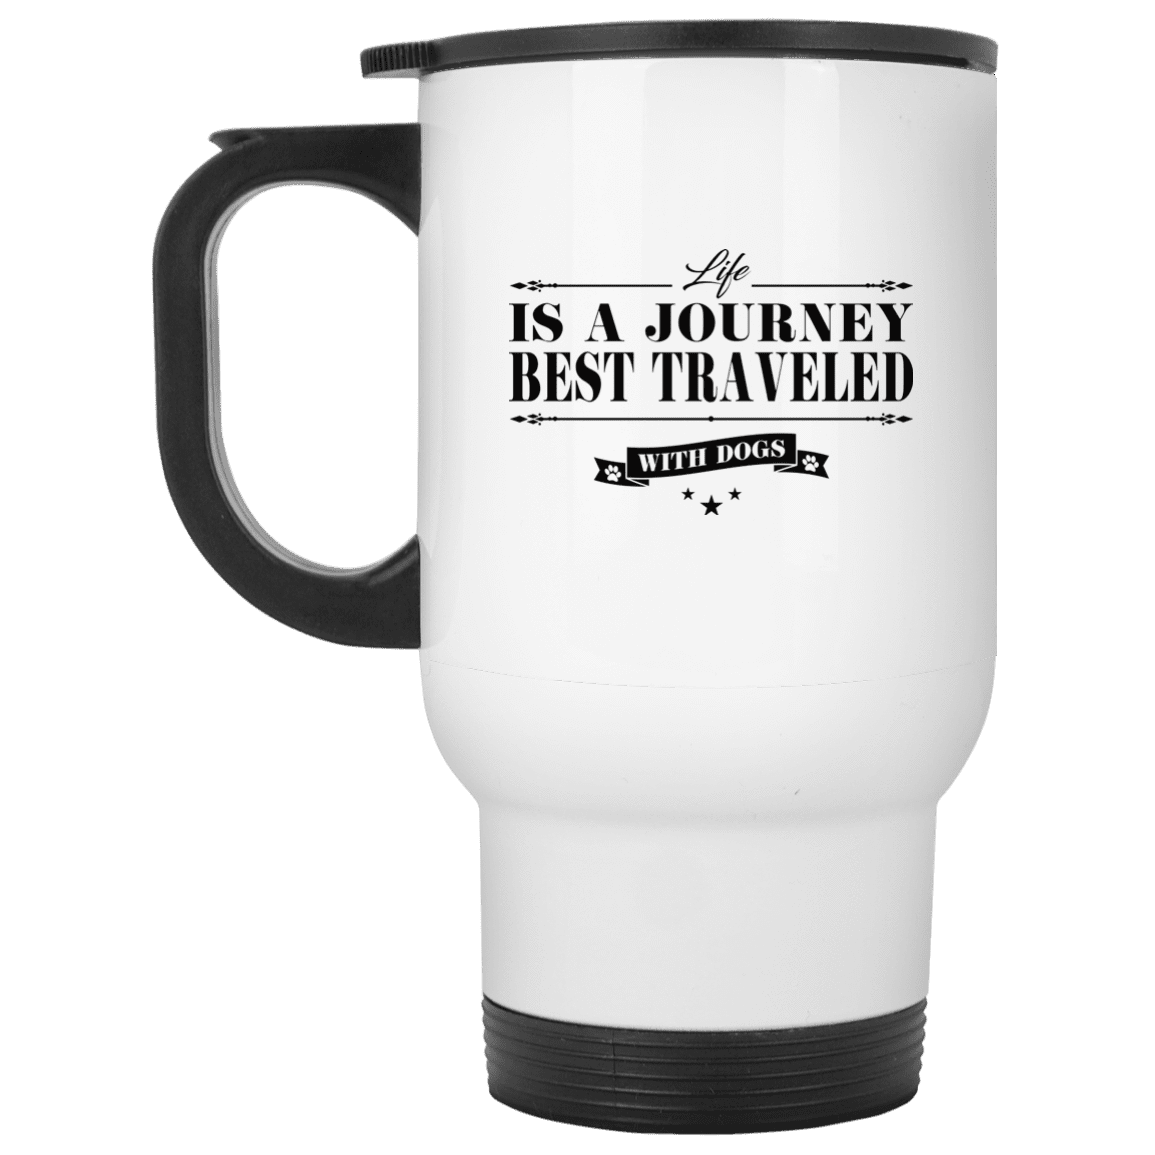 Life Is a Journey Best Travelled With Dogs - Mugs.